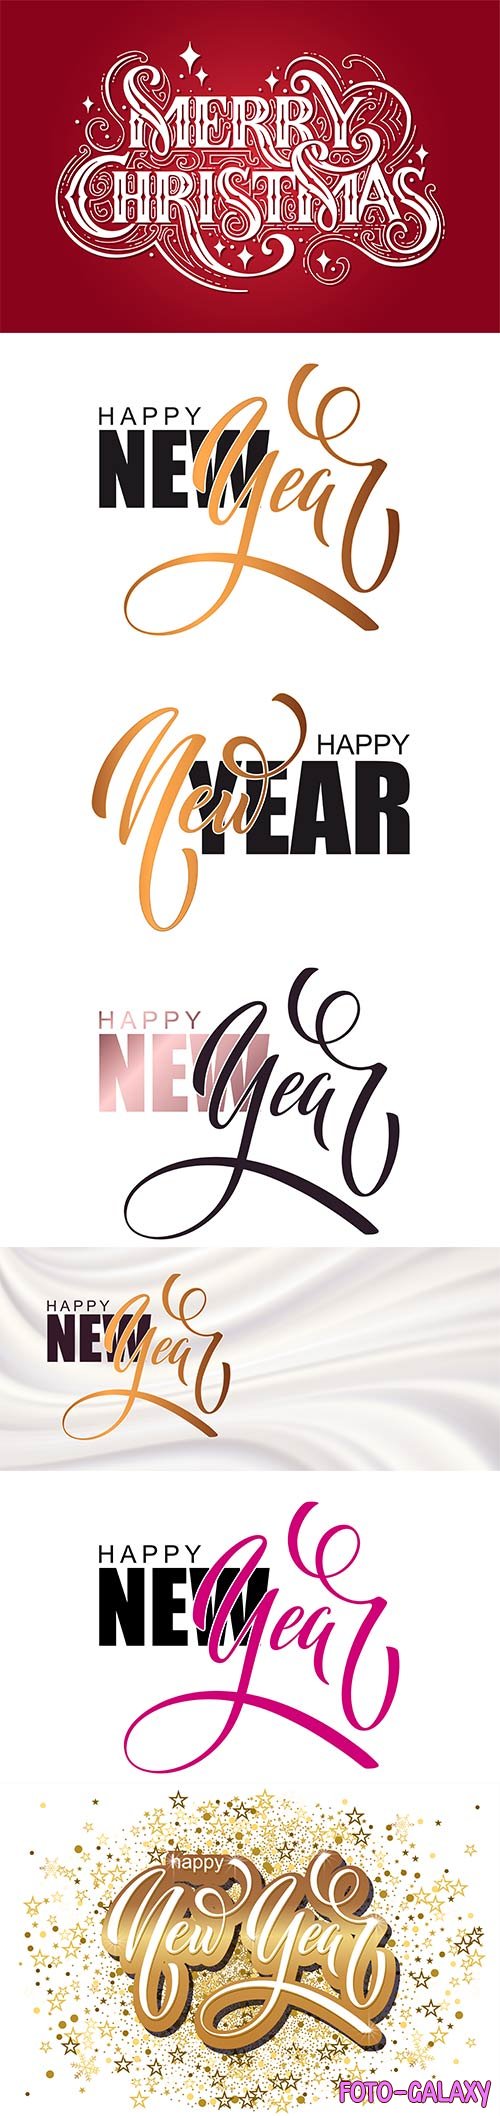 Happy new year hand lettering calligraphy vector illustration